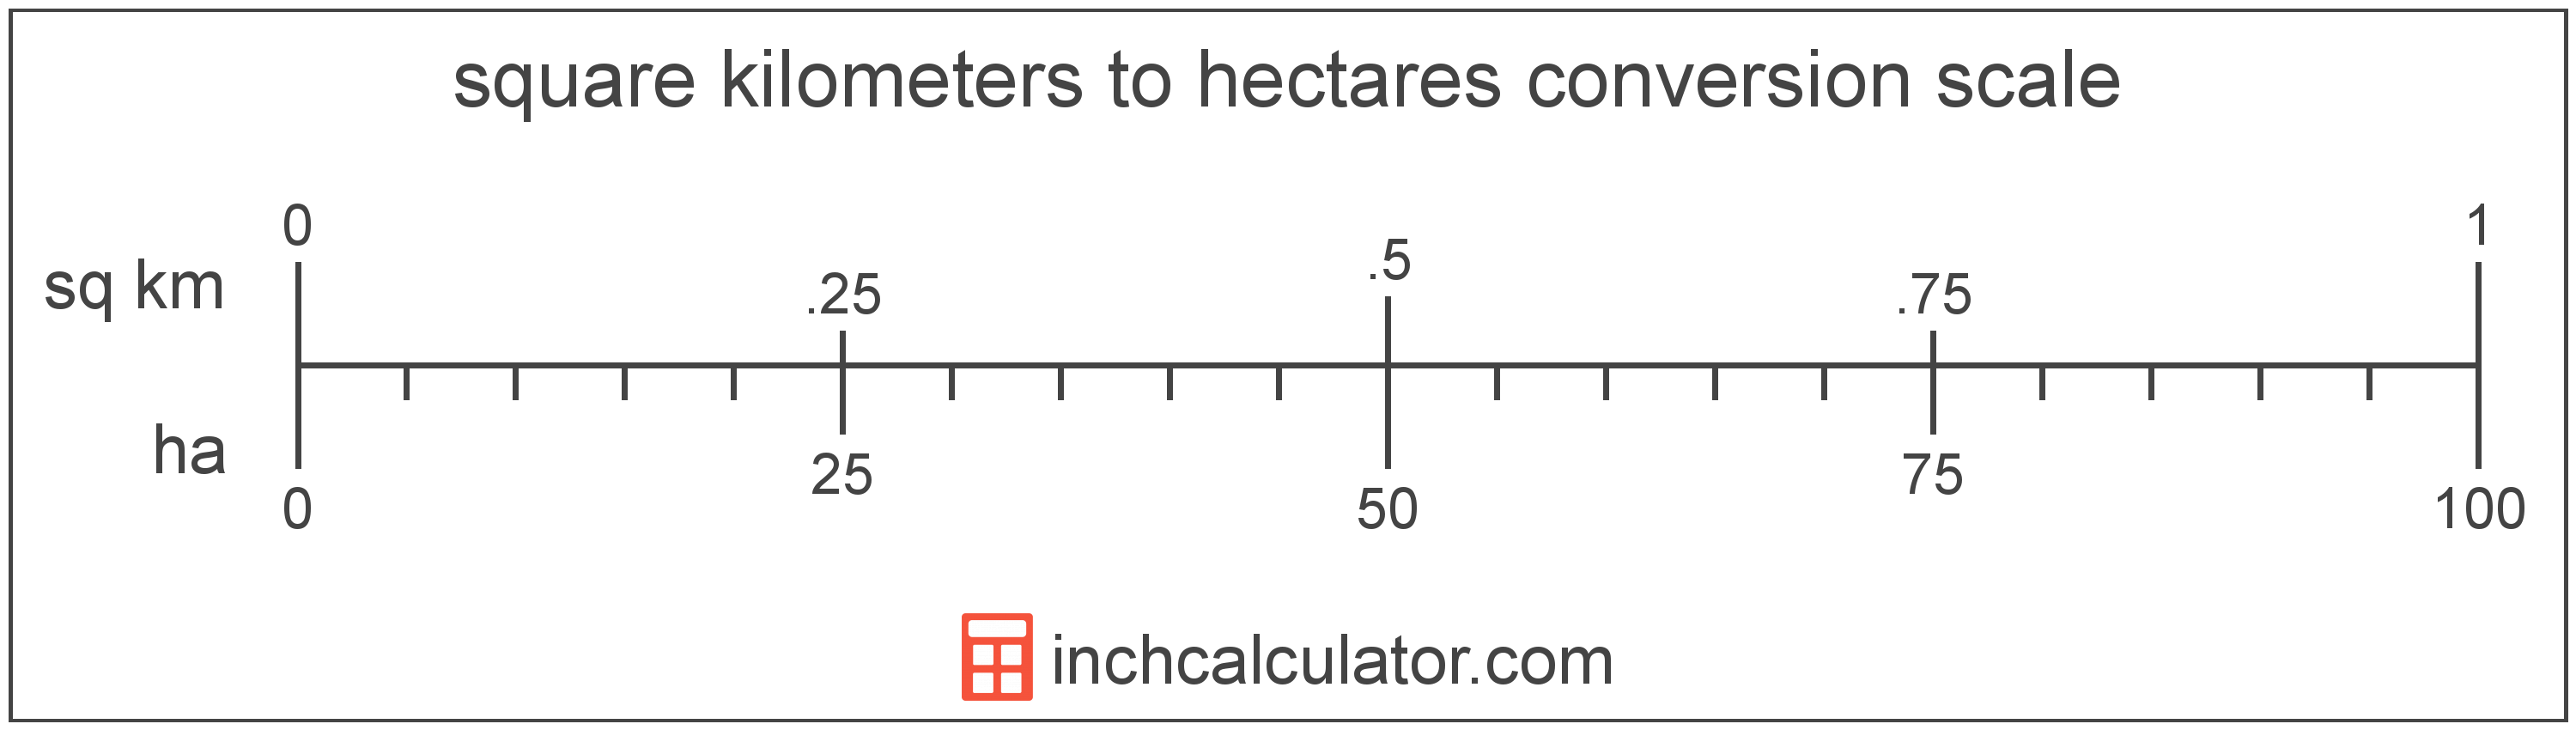 conversion scale showing hectares and equivalent square kilometers area values